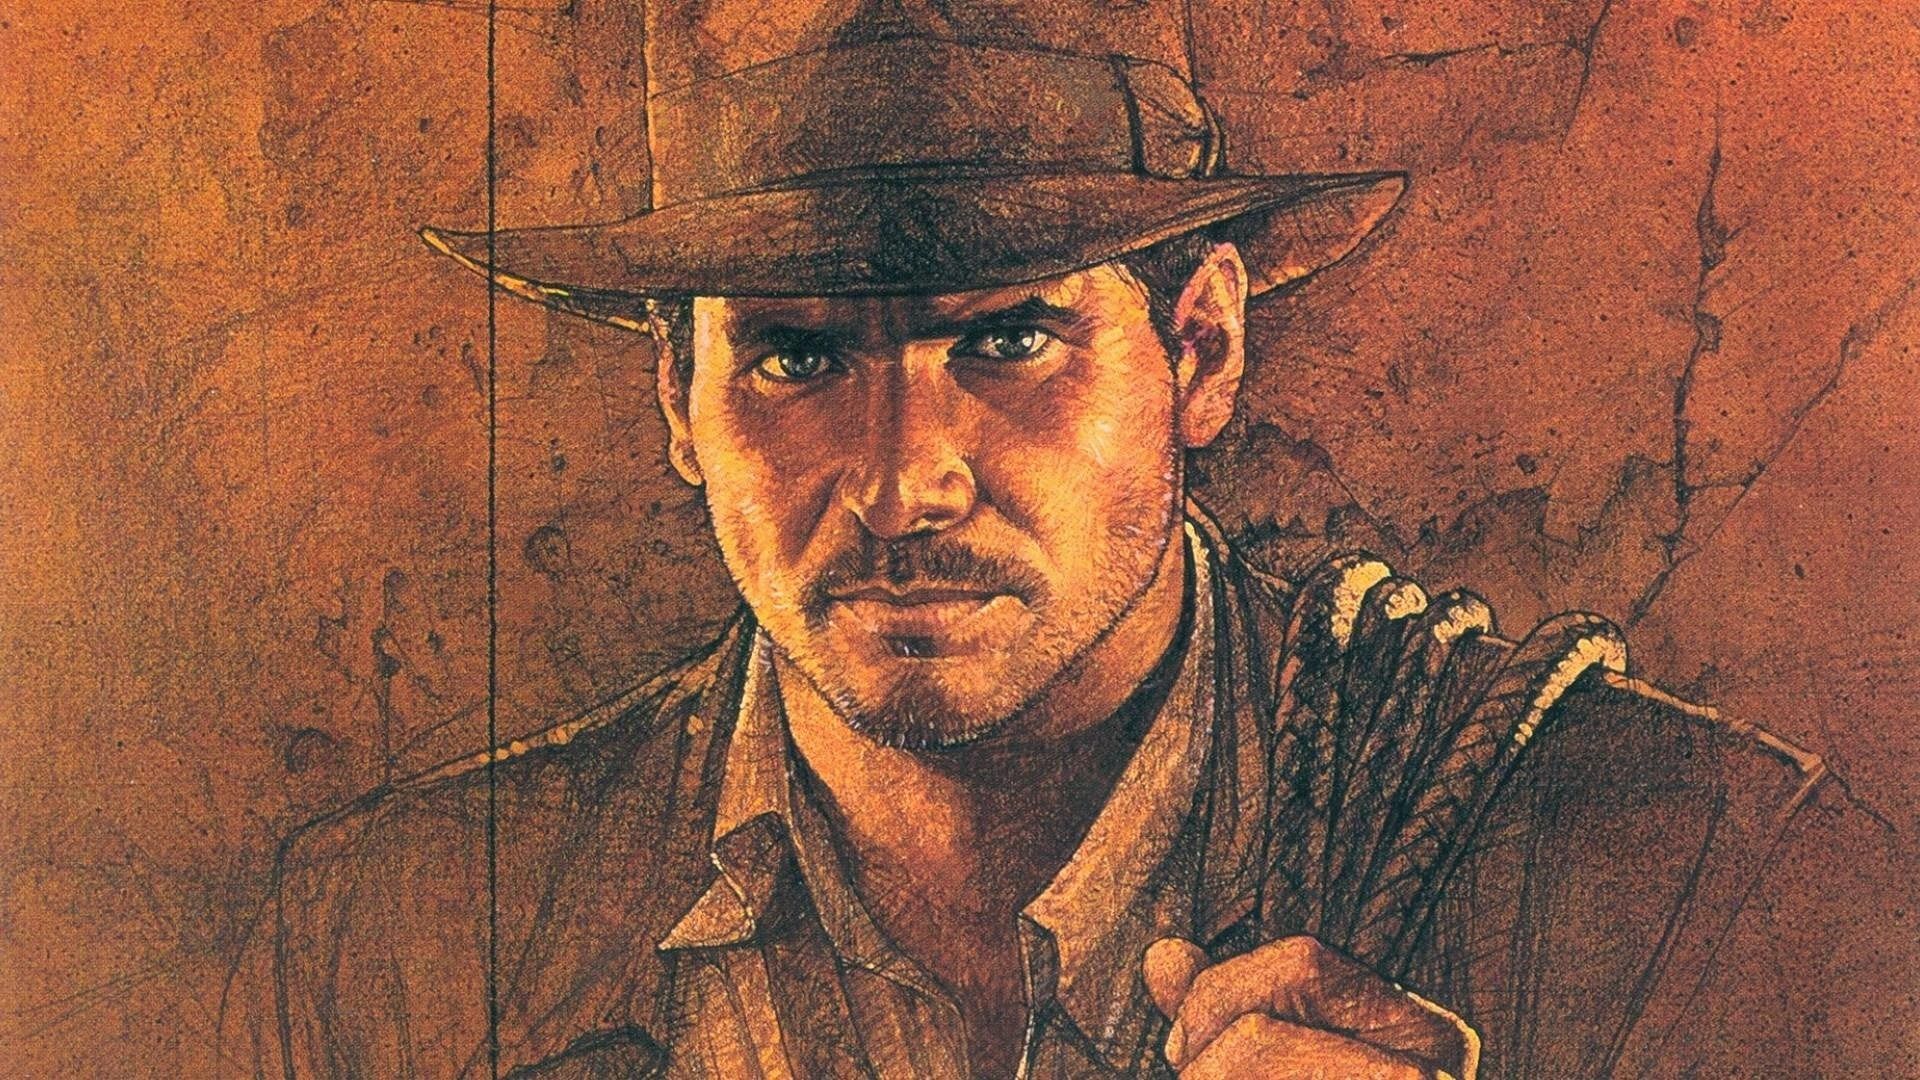 bethesda-s-indiana-jones-game-rumoured-to-be-an-xbox-exclusive-despite-previous-reports